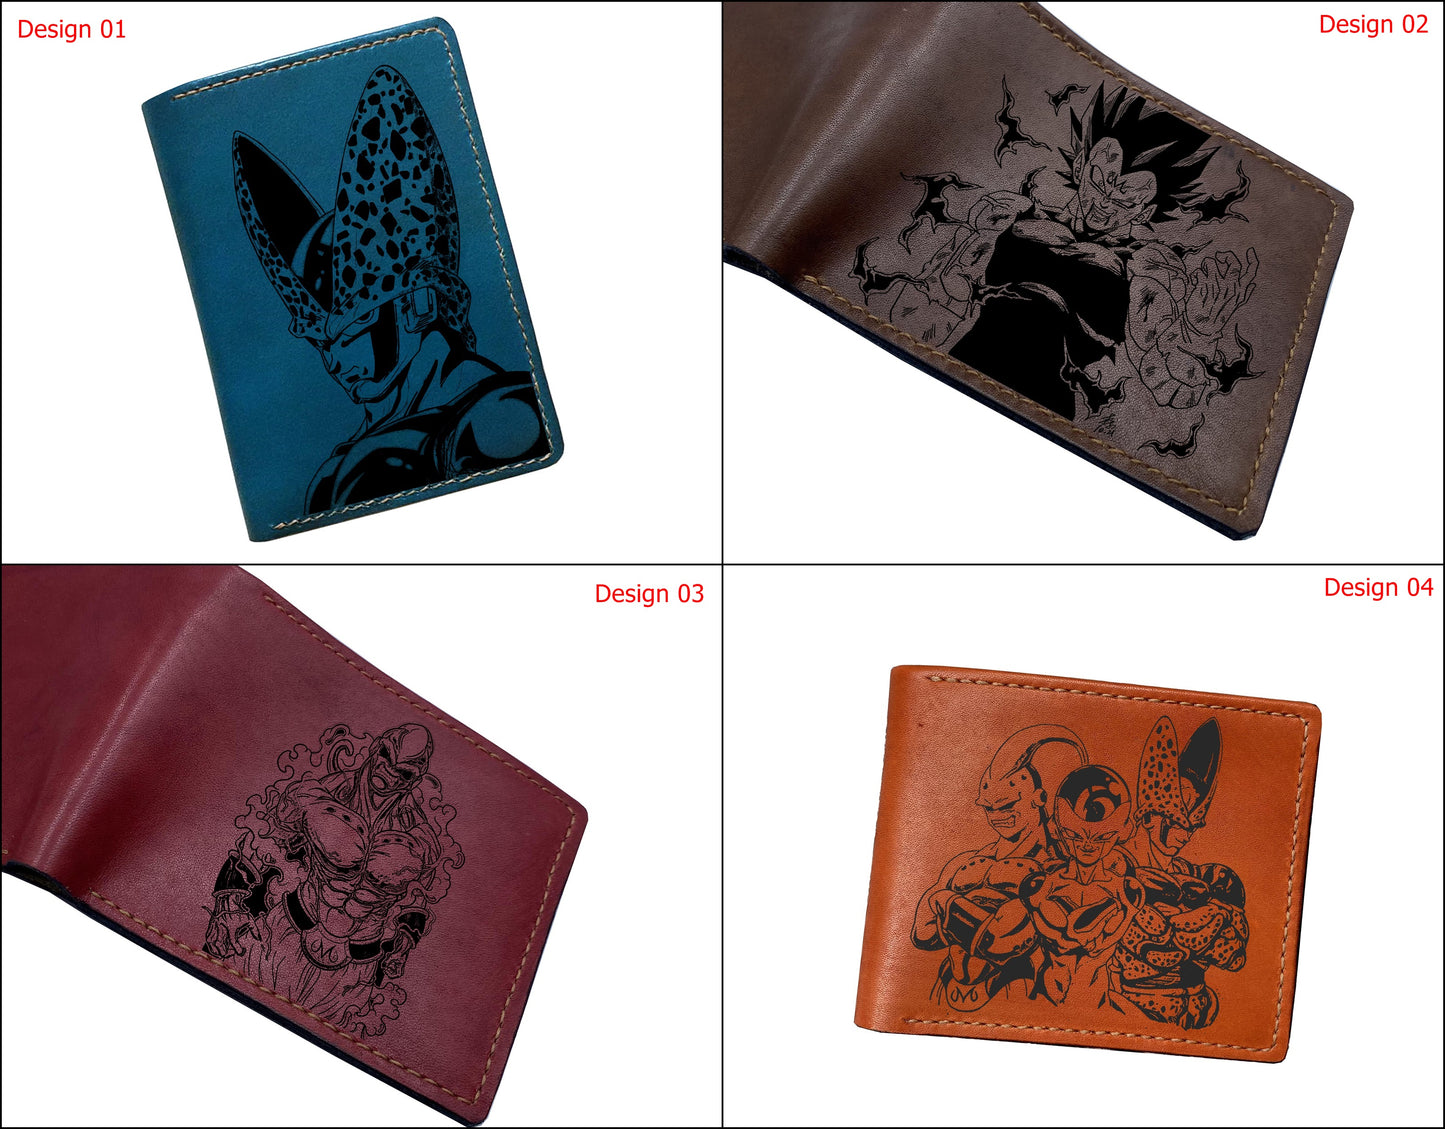 Mayan Corner - Dragon ball characters drawing leather wallet, fan art leather gift for men, wallet for boyfriend, birthday christmas present ideas - Cell android